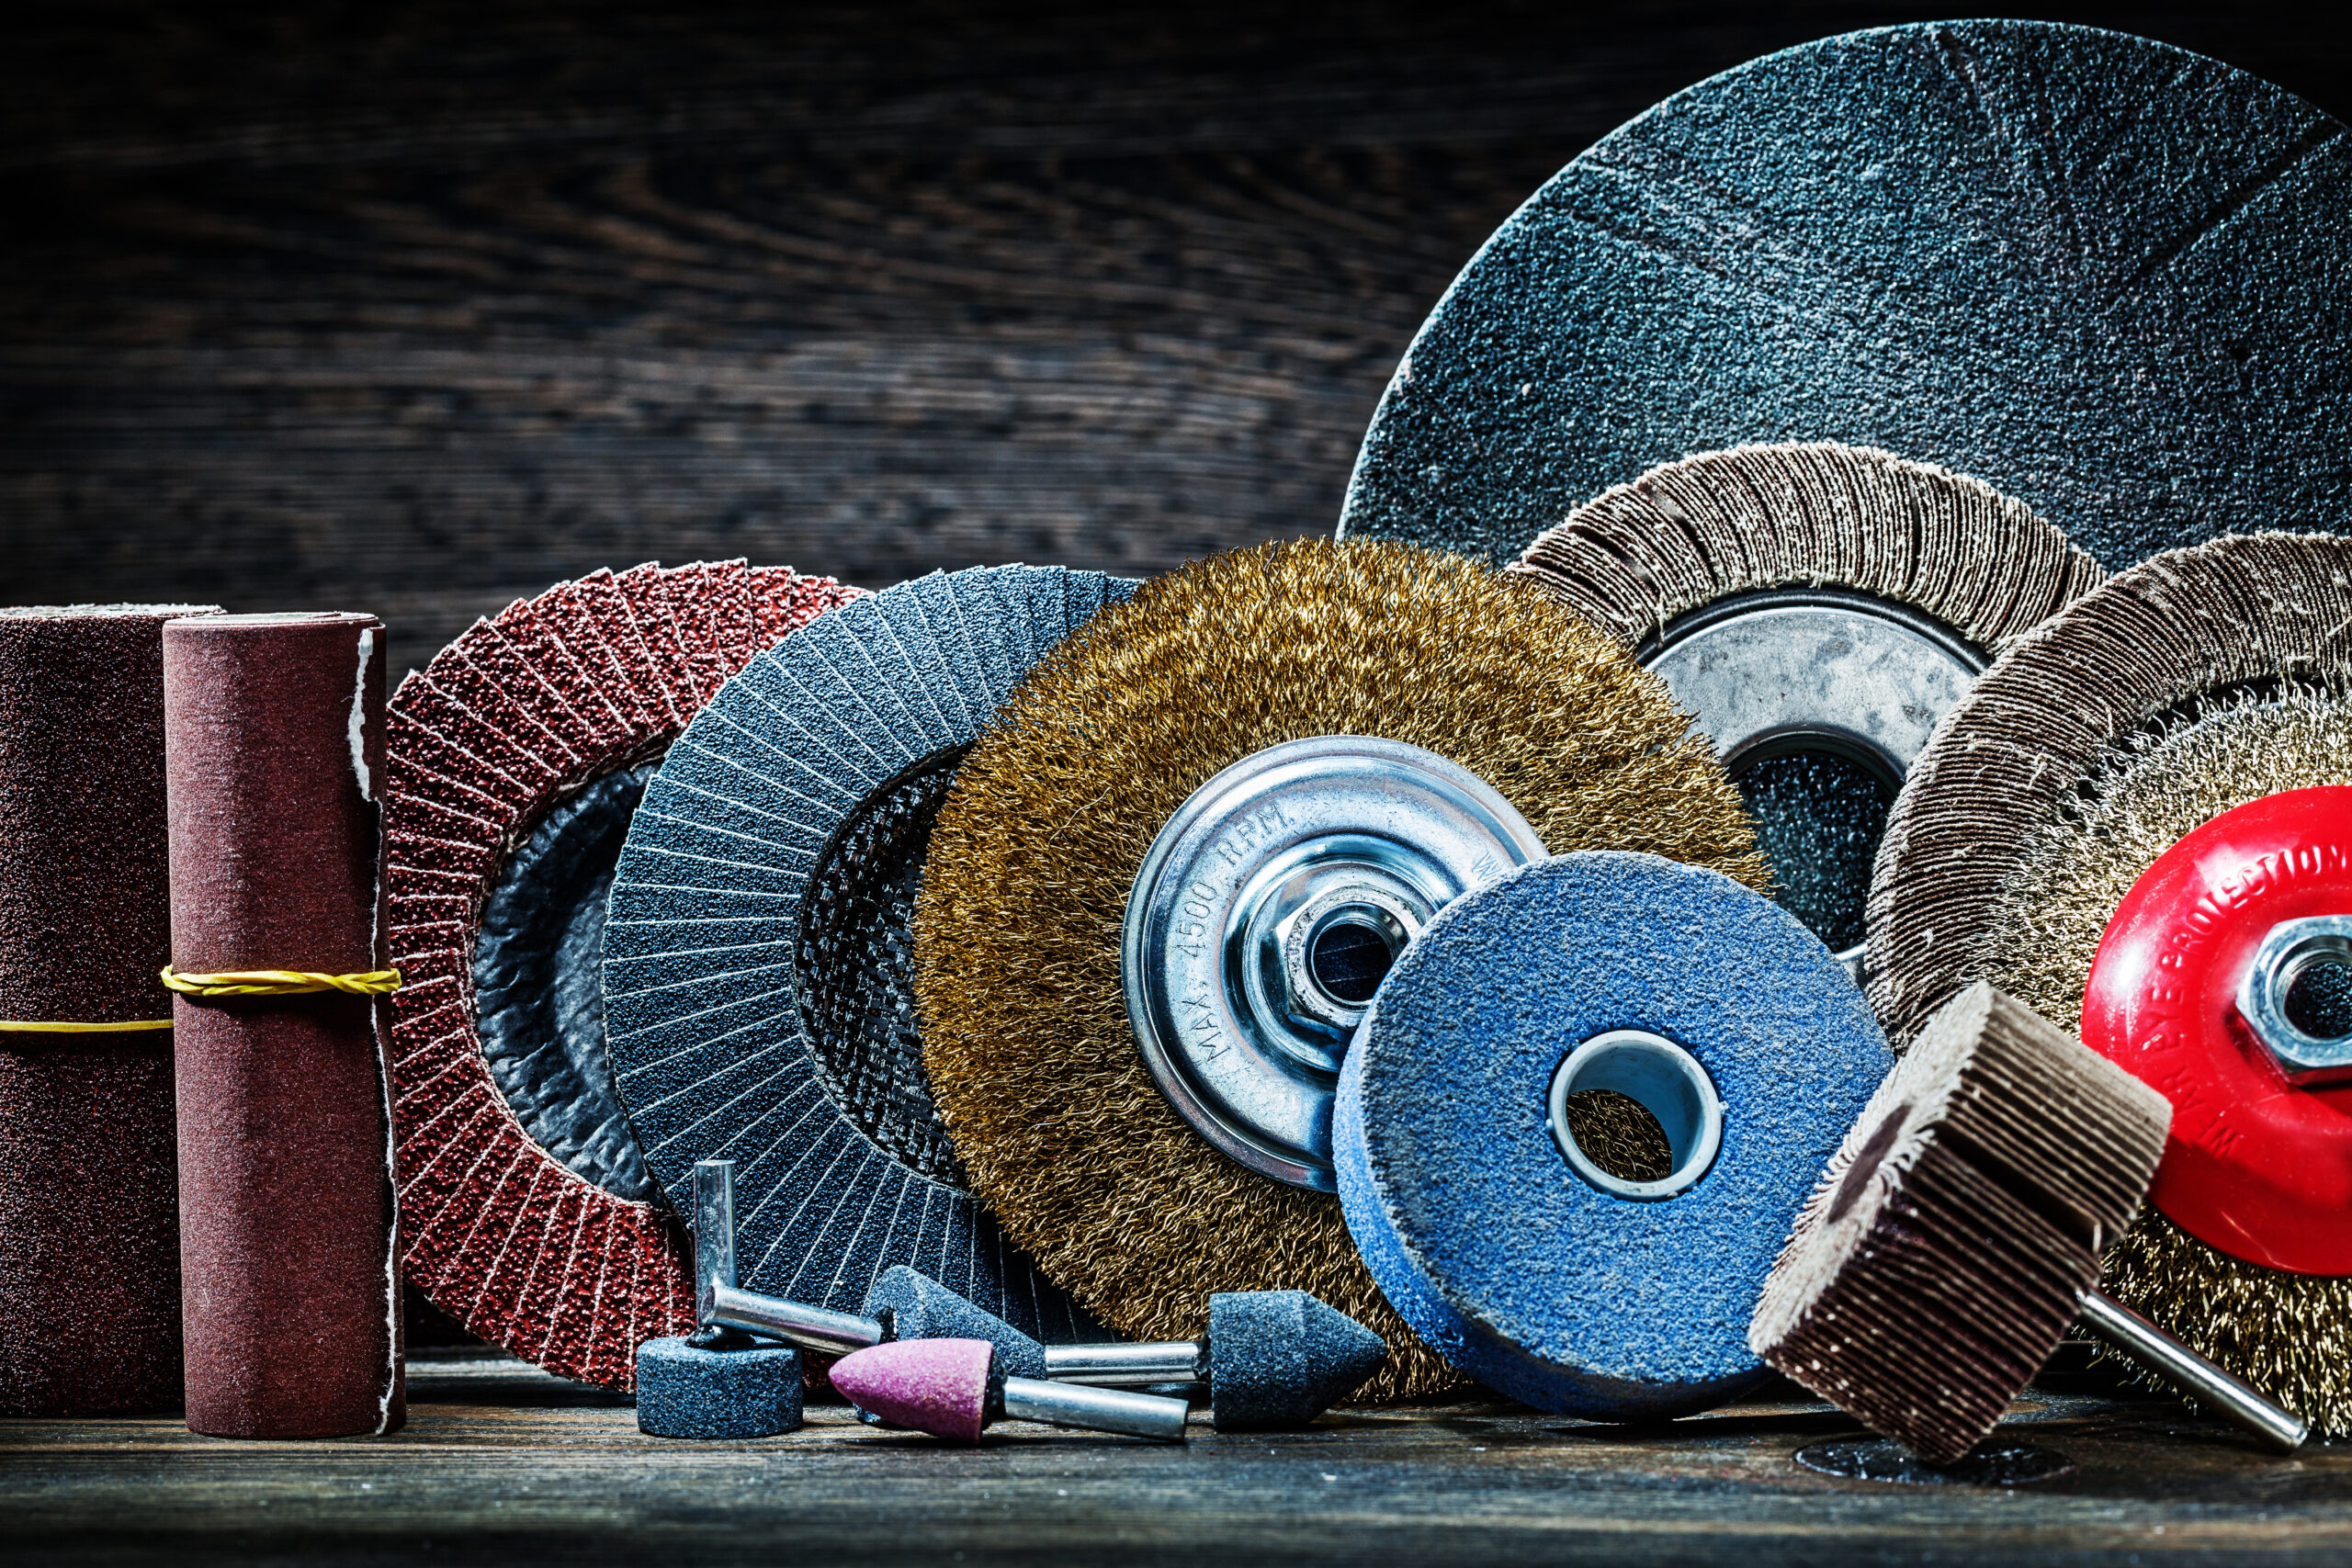 Metalworking products in a pile